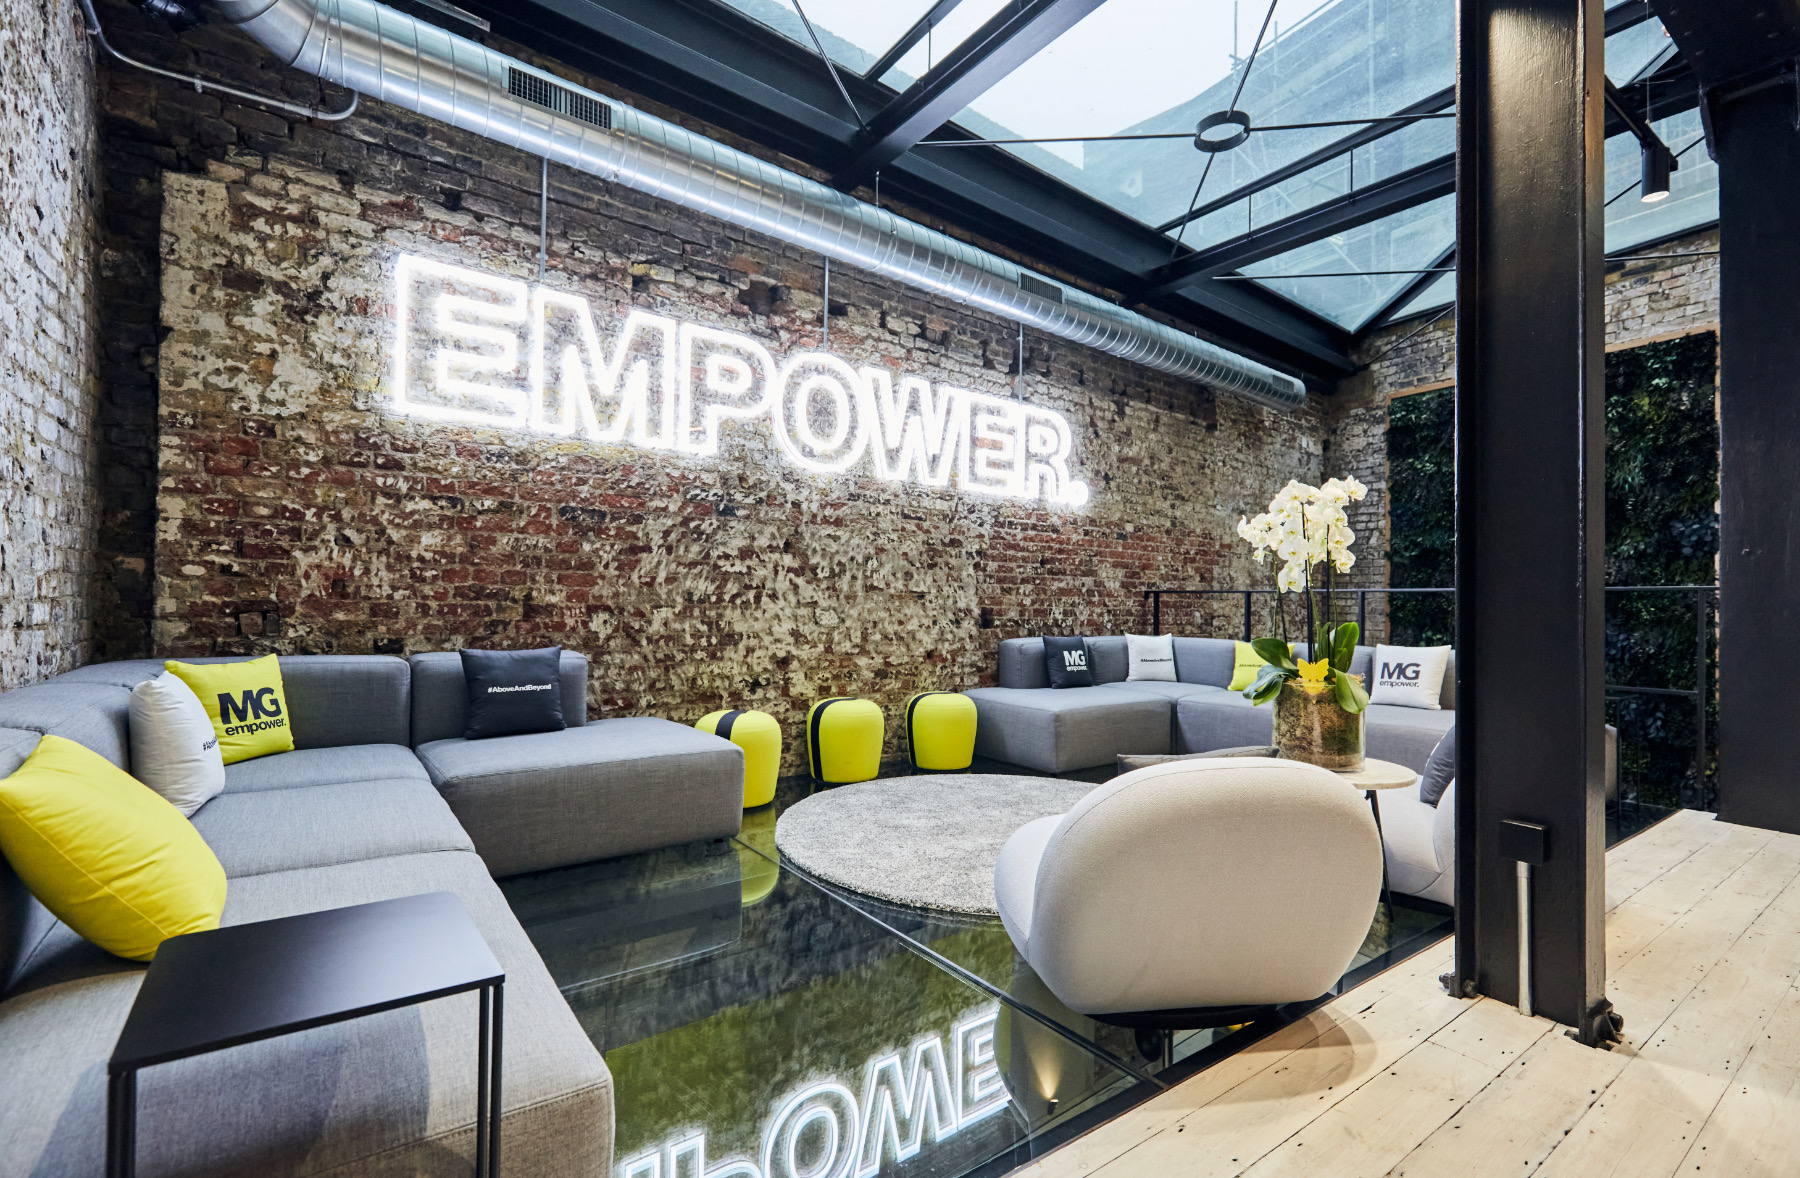 mgempower-london-office-4